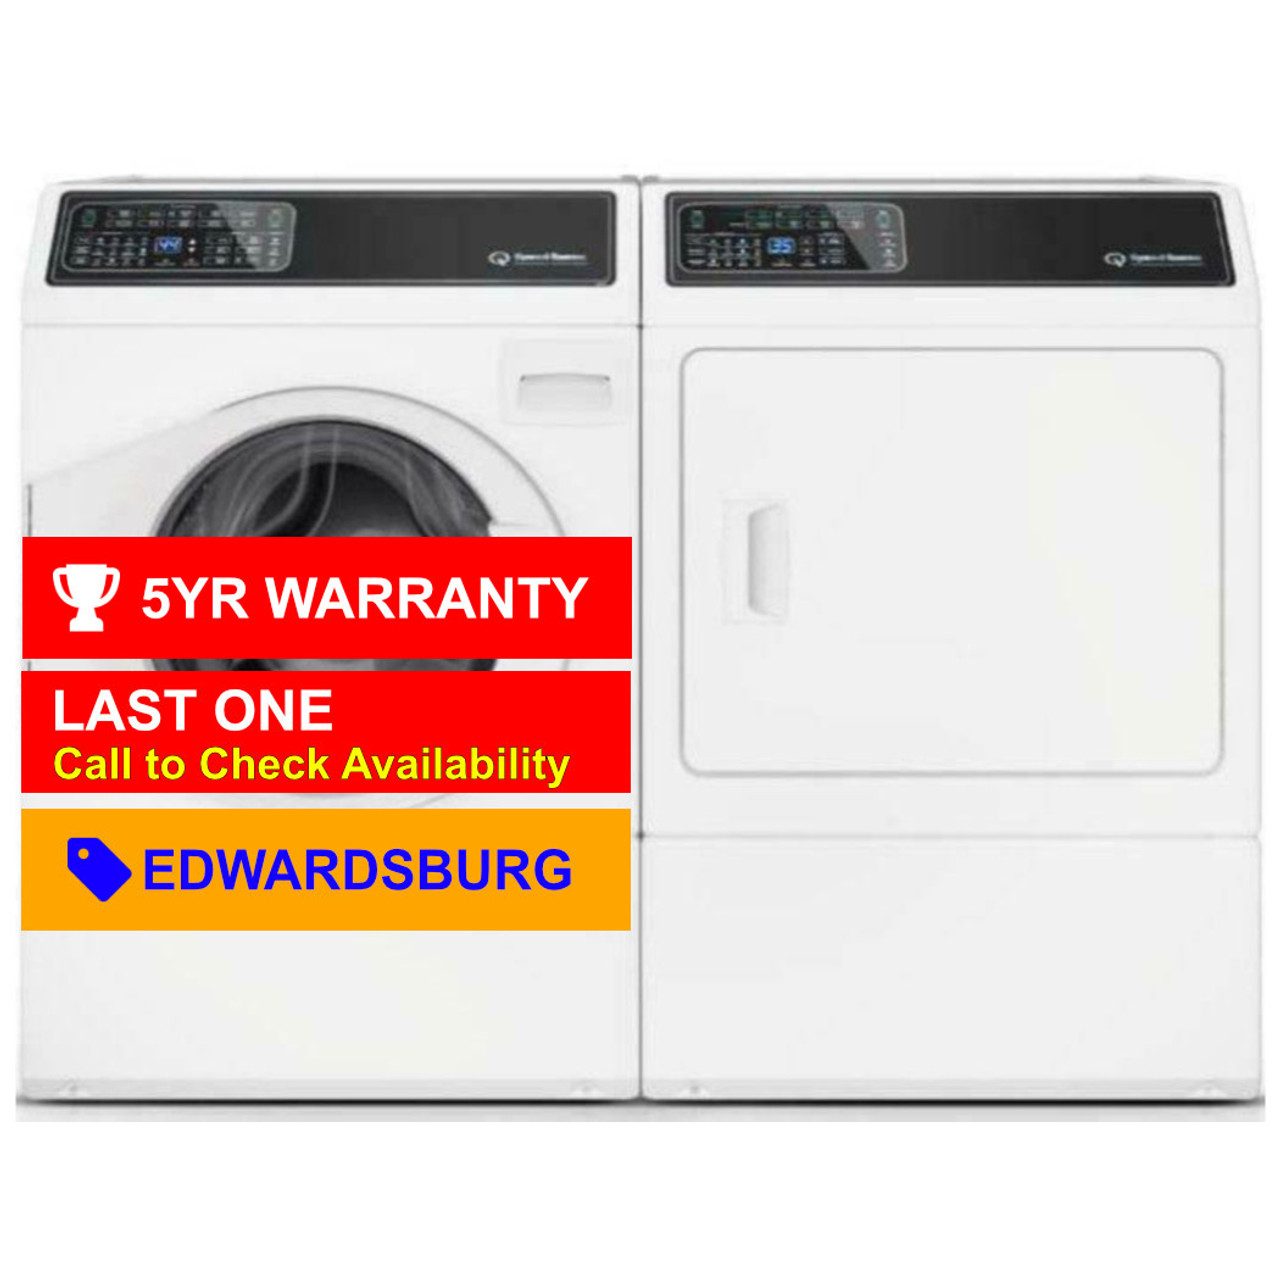 Speed Queen 3.48 Cu. ft. White Front Load Washer, FF7005WN